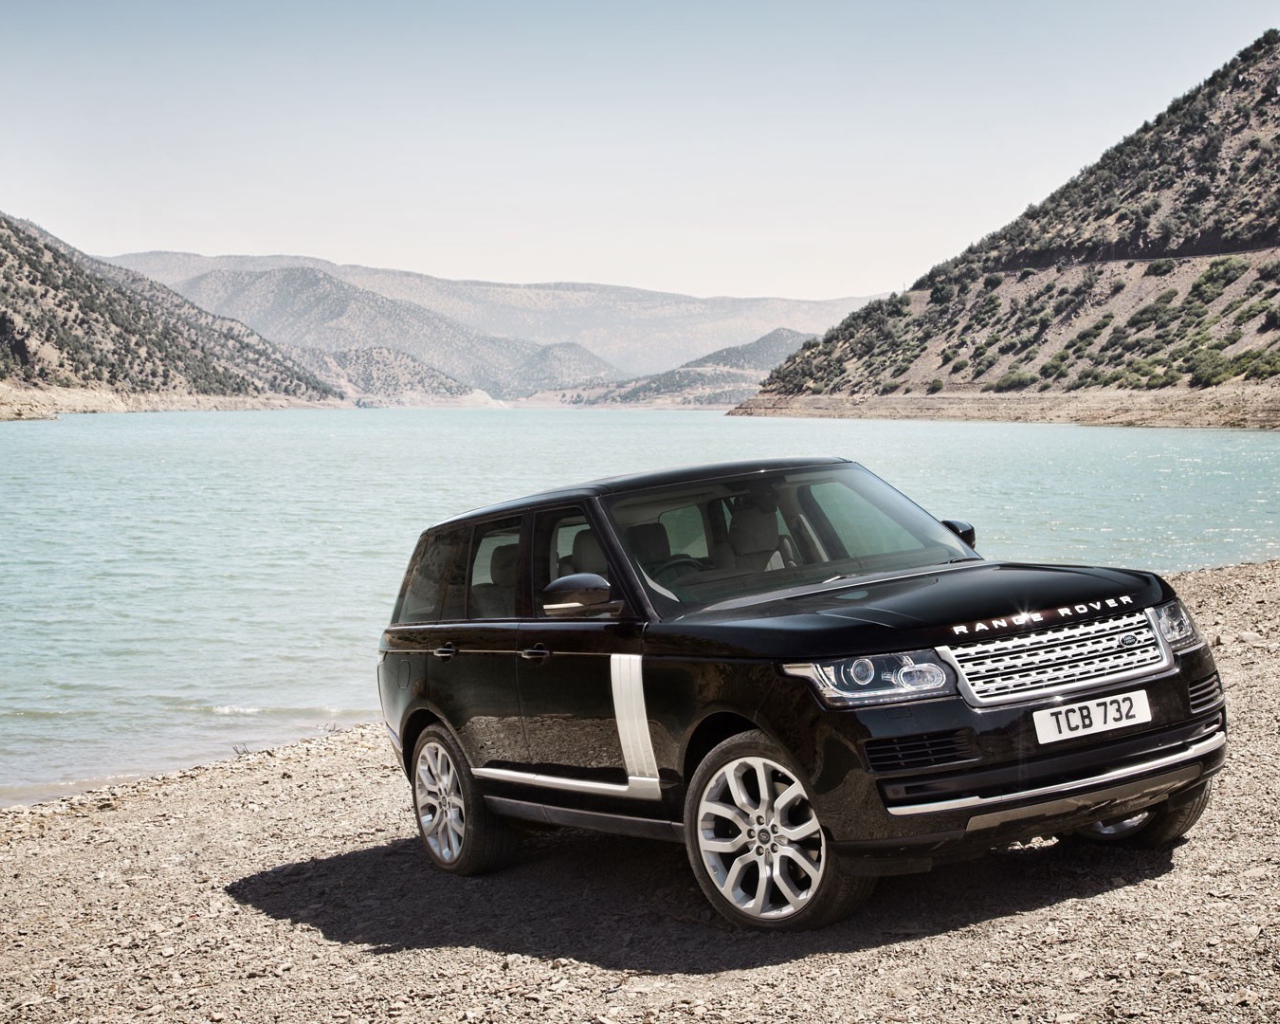 Black Range Rover on the waterfront